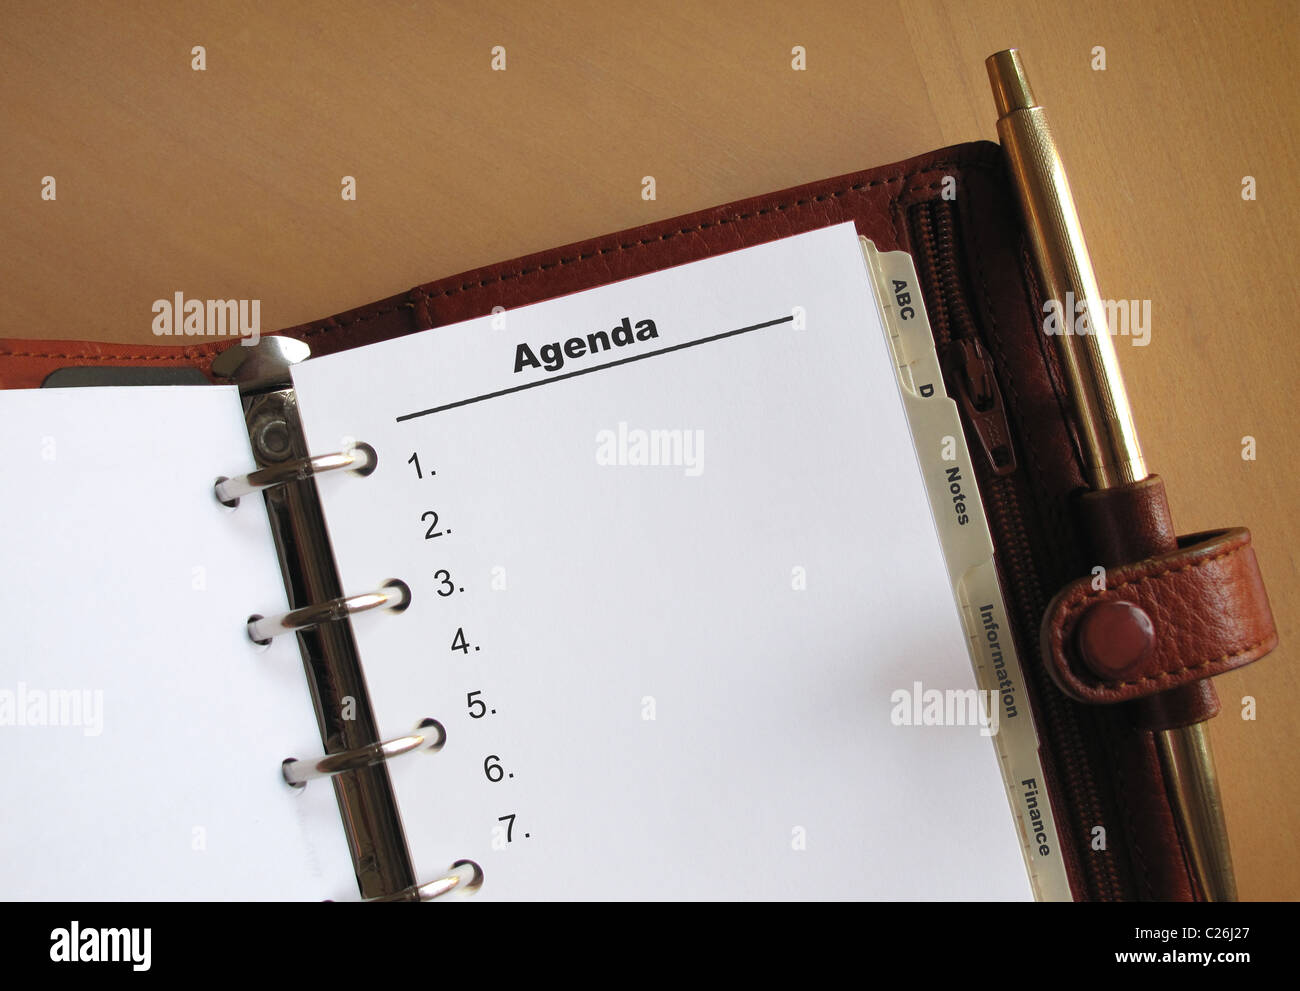 Business concepts Agenda list with numbers in a personal organizer Stock Photo